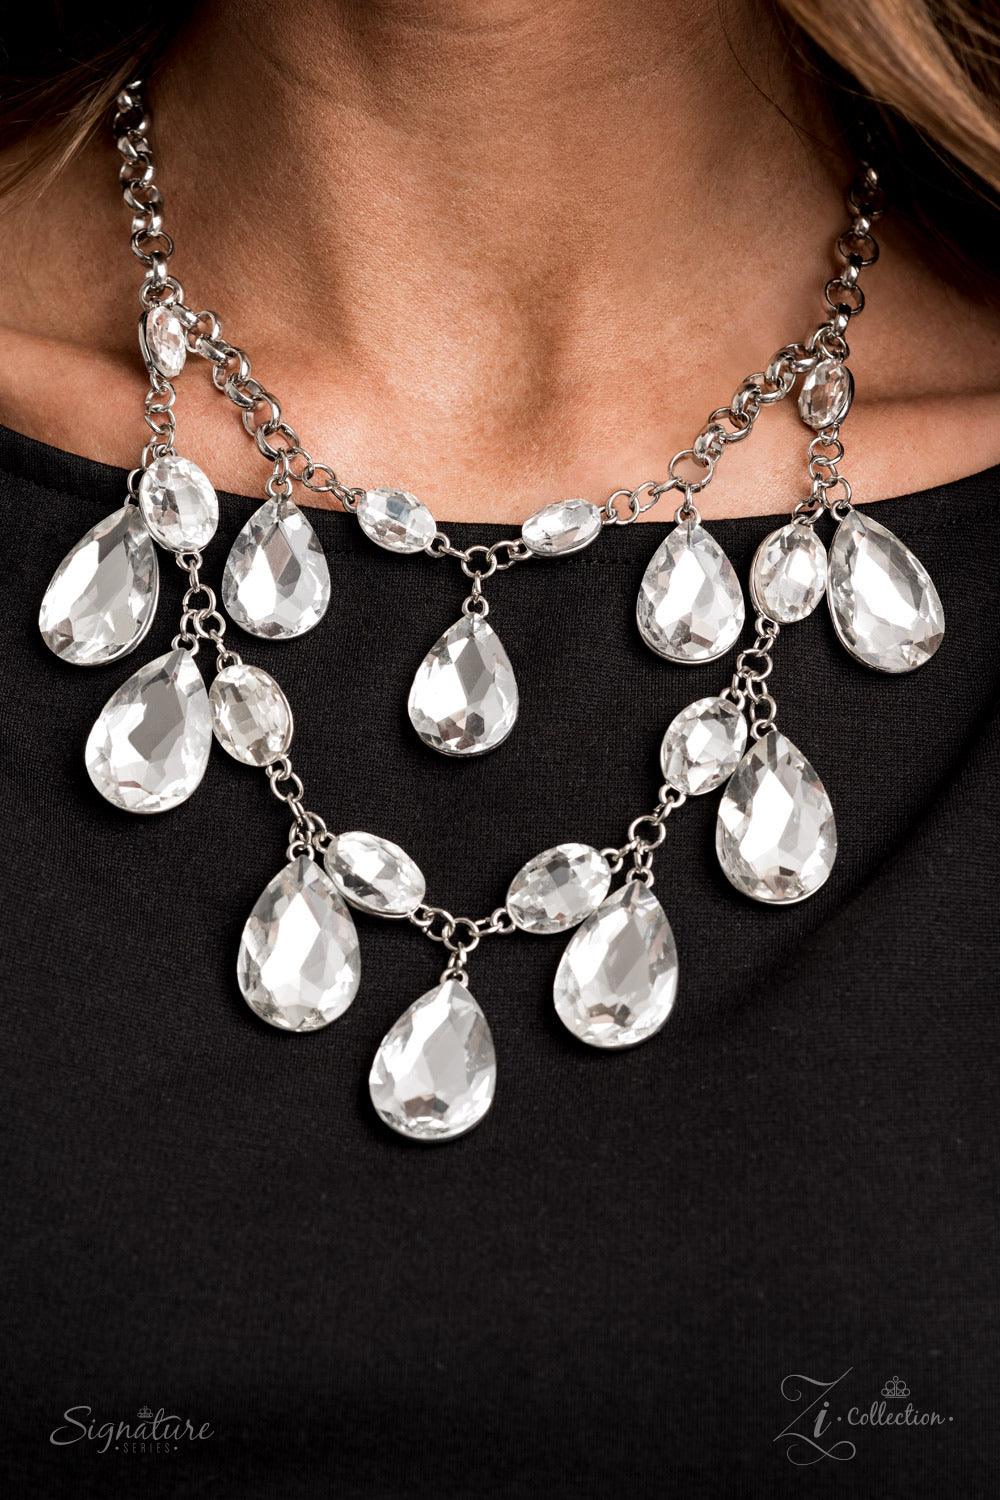 Paparazzi Accessories The Sarah 💗💗ZiCollection $25💗💗 Tiers of oversized white teardrop gems demand attention as they drip from two blinding rows of elegantly linked white oval rhinestones. Infused with sections of chunky silver chain links, the sparkl